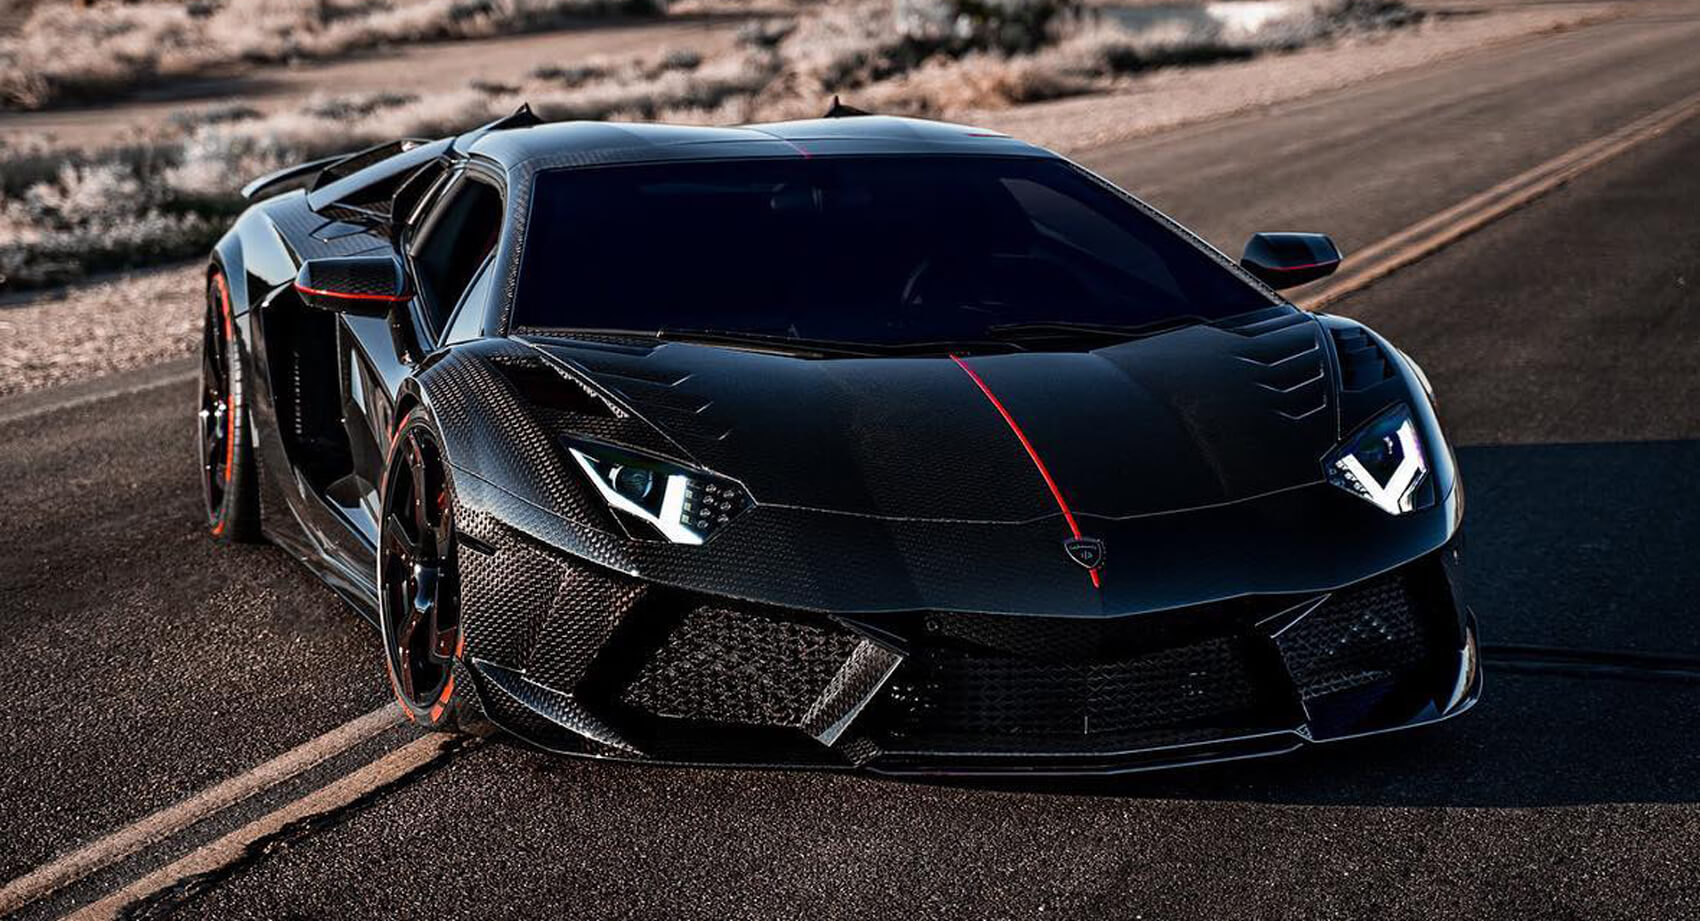 Mansory Carbonado Is A Flashy Lamborghini Aventador S Roadster With A  Matching Price Tag | Carscoops